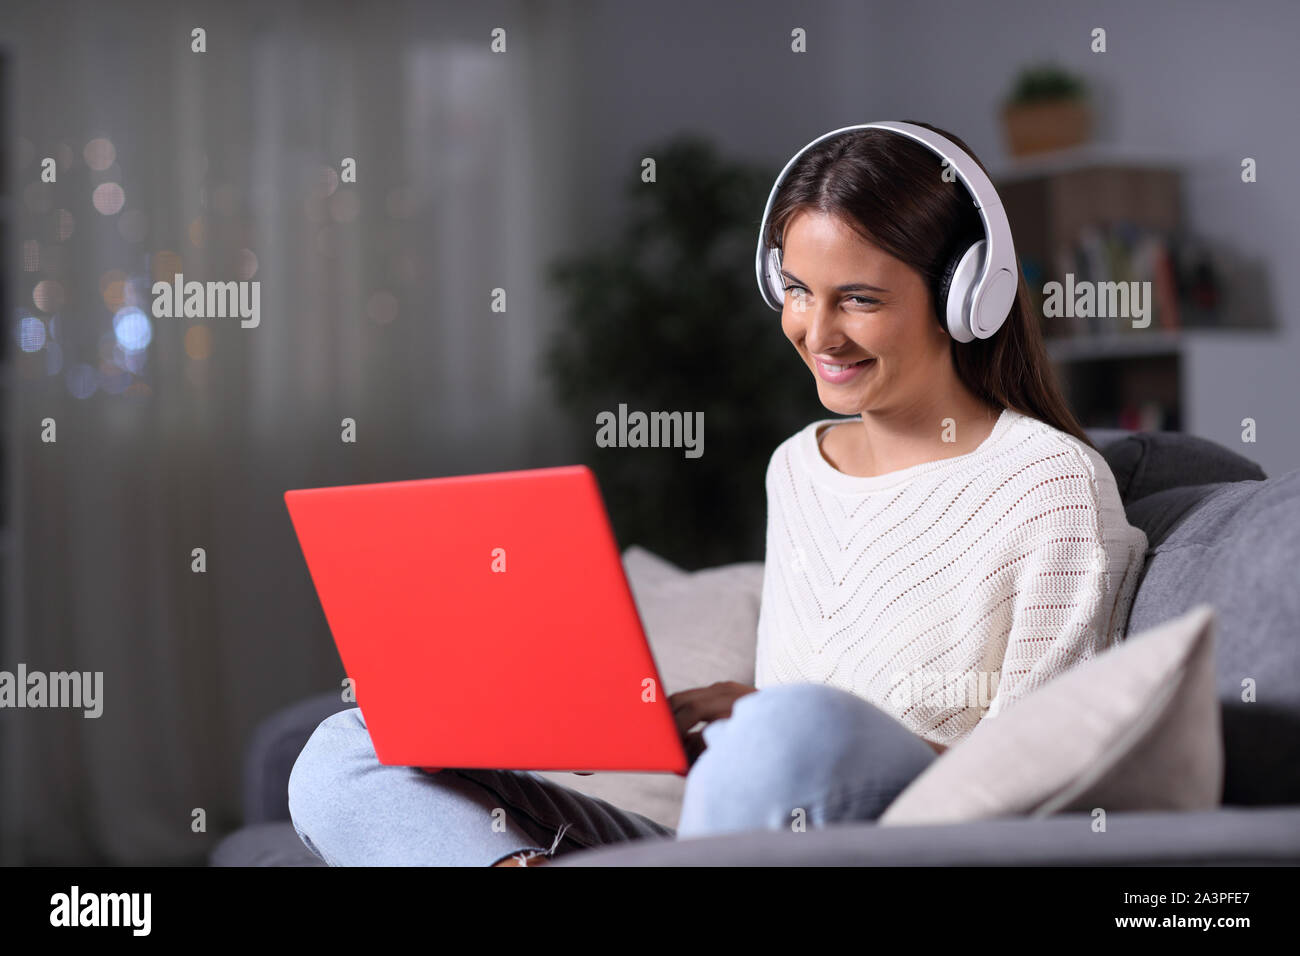 Happy girl wearing headphones using a red laptop sitting on a couch in the night at home Stock Photo